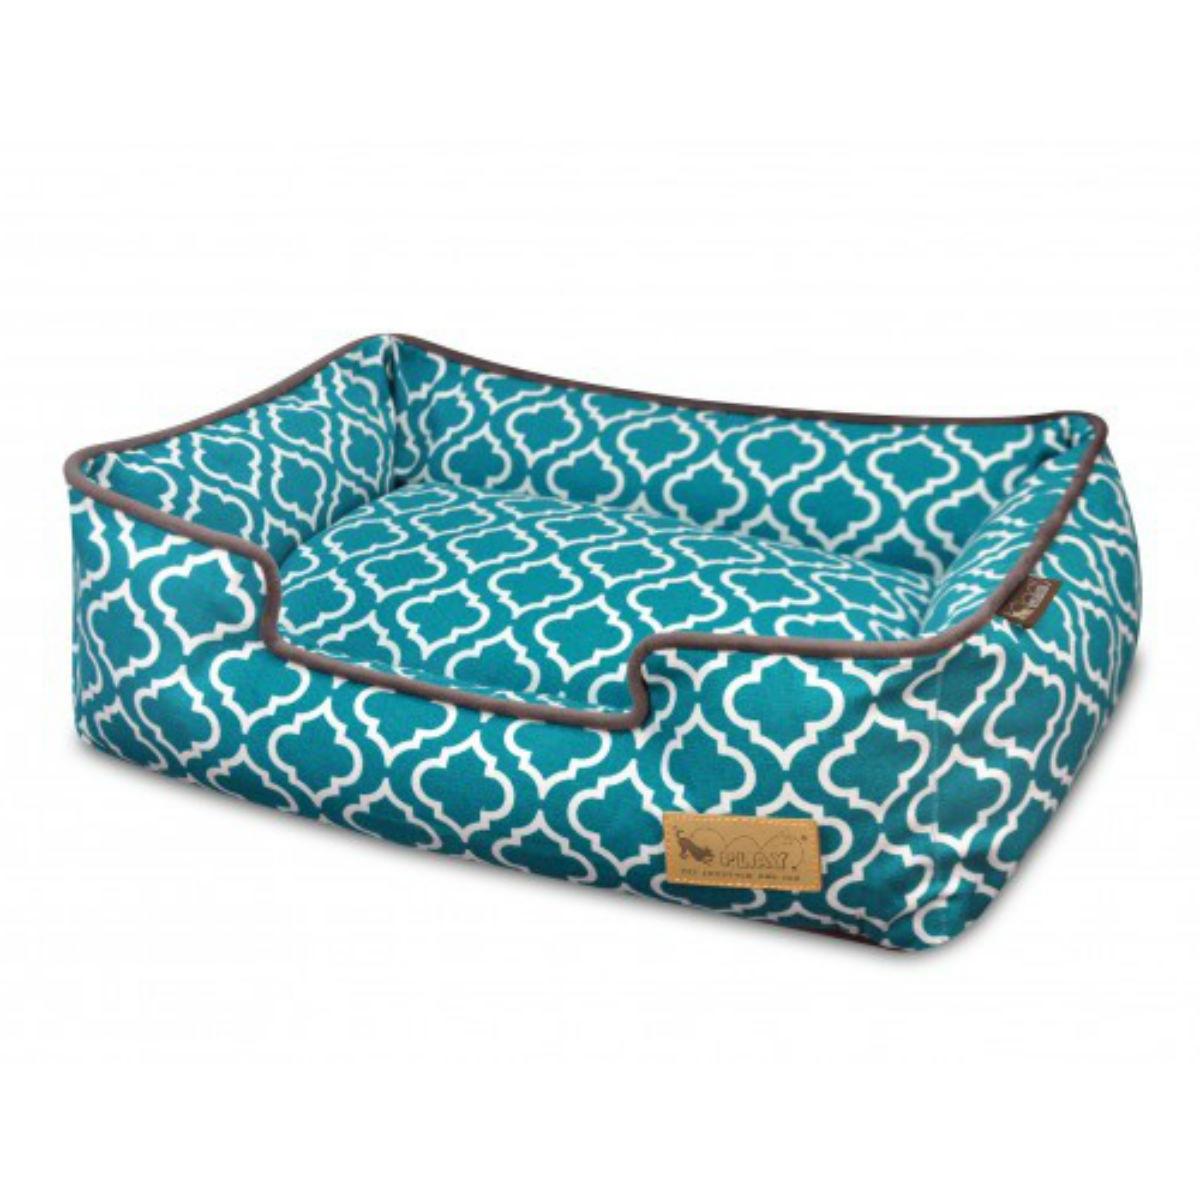 P.L.A.Y. Moroccan Lounge Dog Bed - Teal